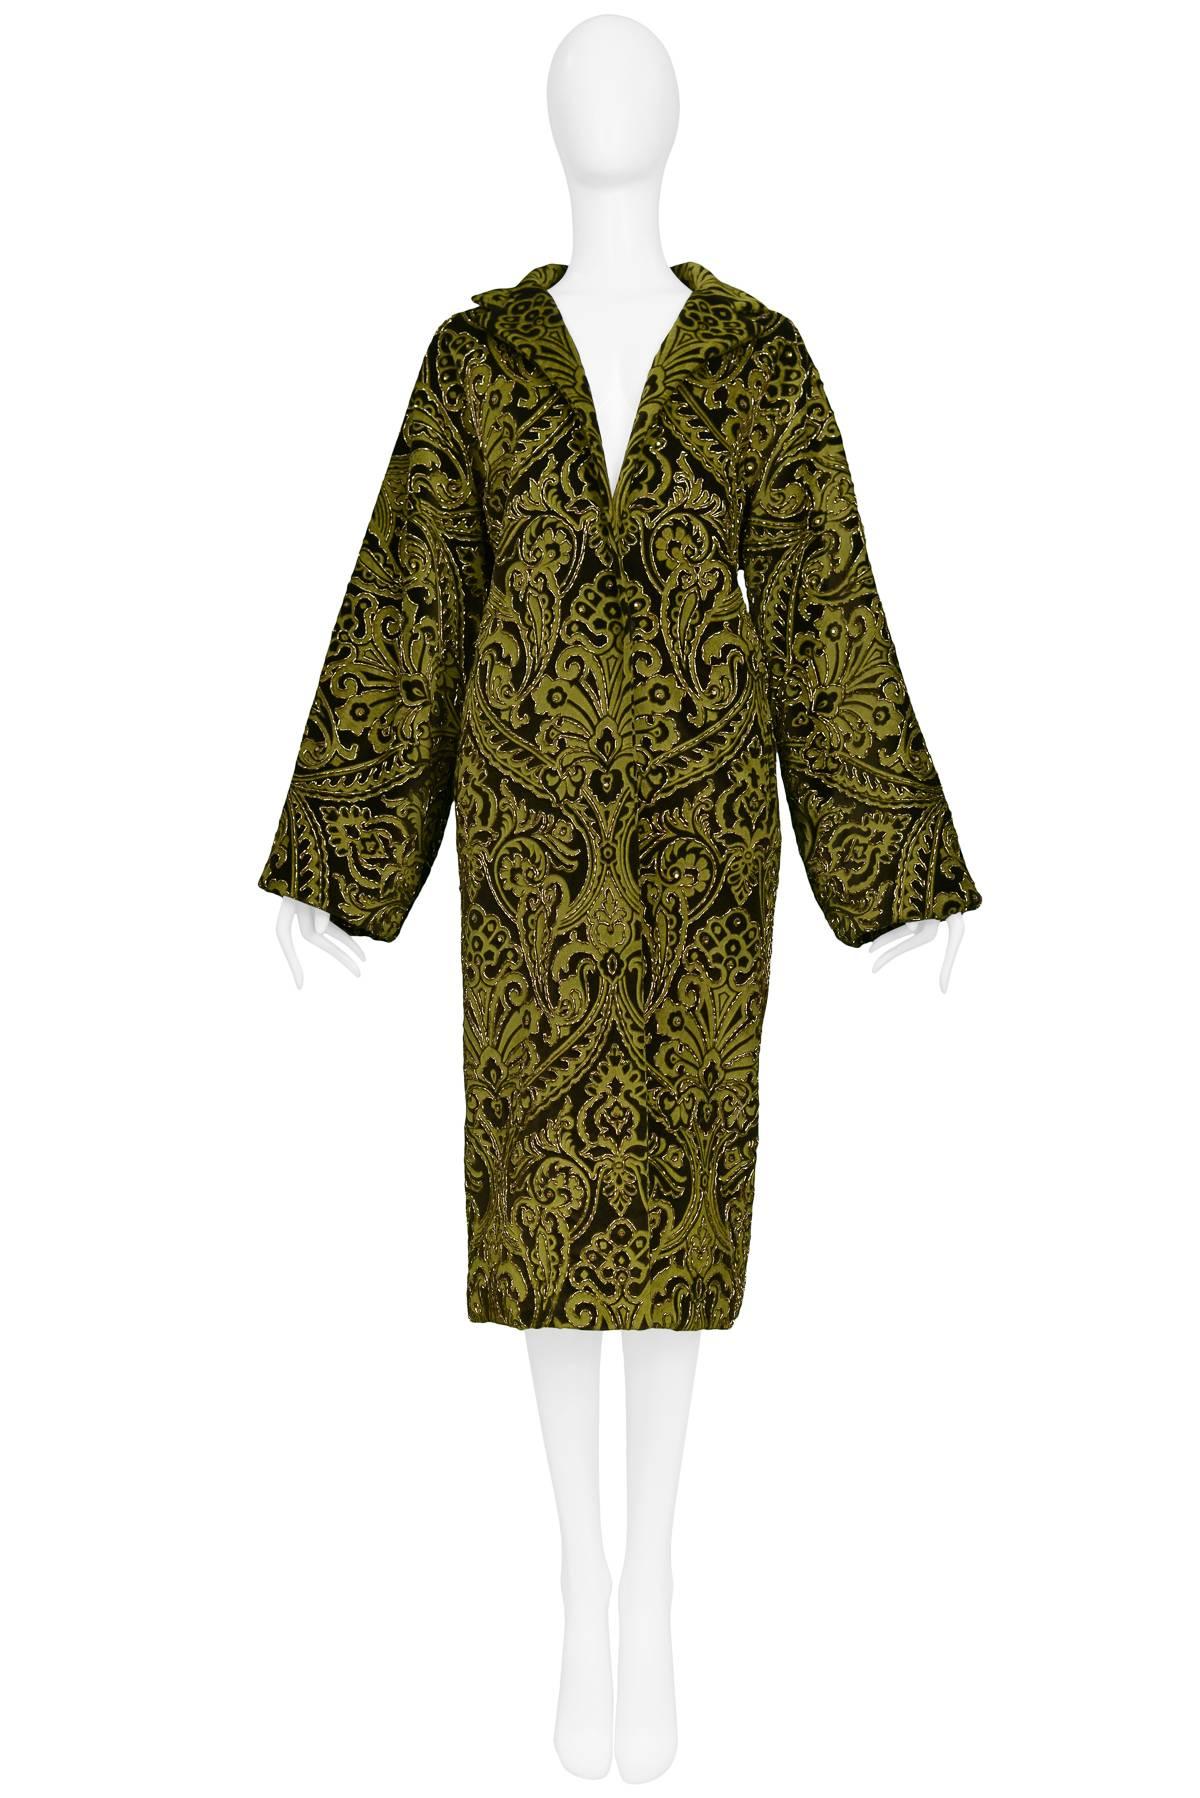 We are excited to offer a vintage Dolce & Gabbana two-tone olive green baroque velvet opera coat featuring intricate gold beading, side pockets, satin lining, and hook & eye closure. 

Dolce & Gabbana
Size 40
Measurements: Shoulder 22